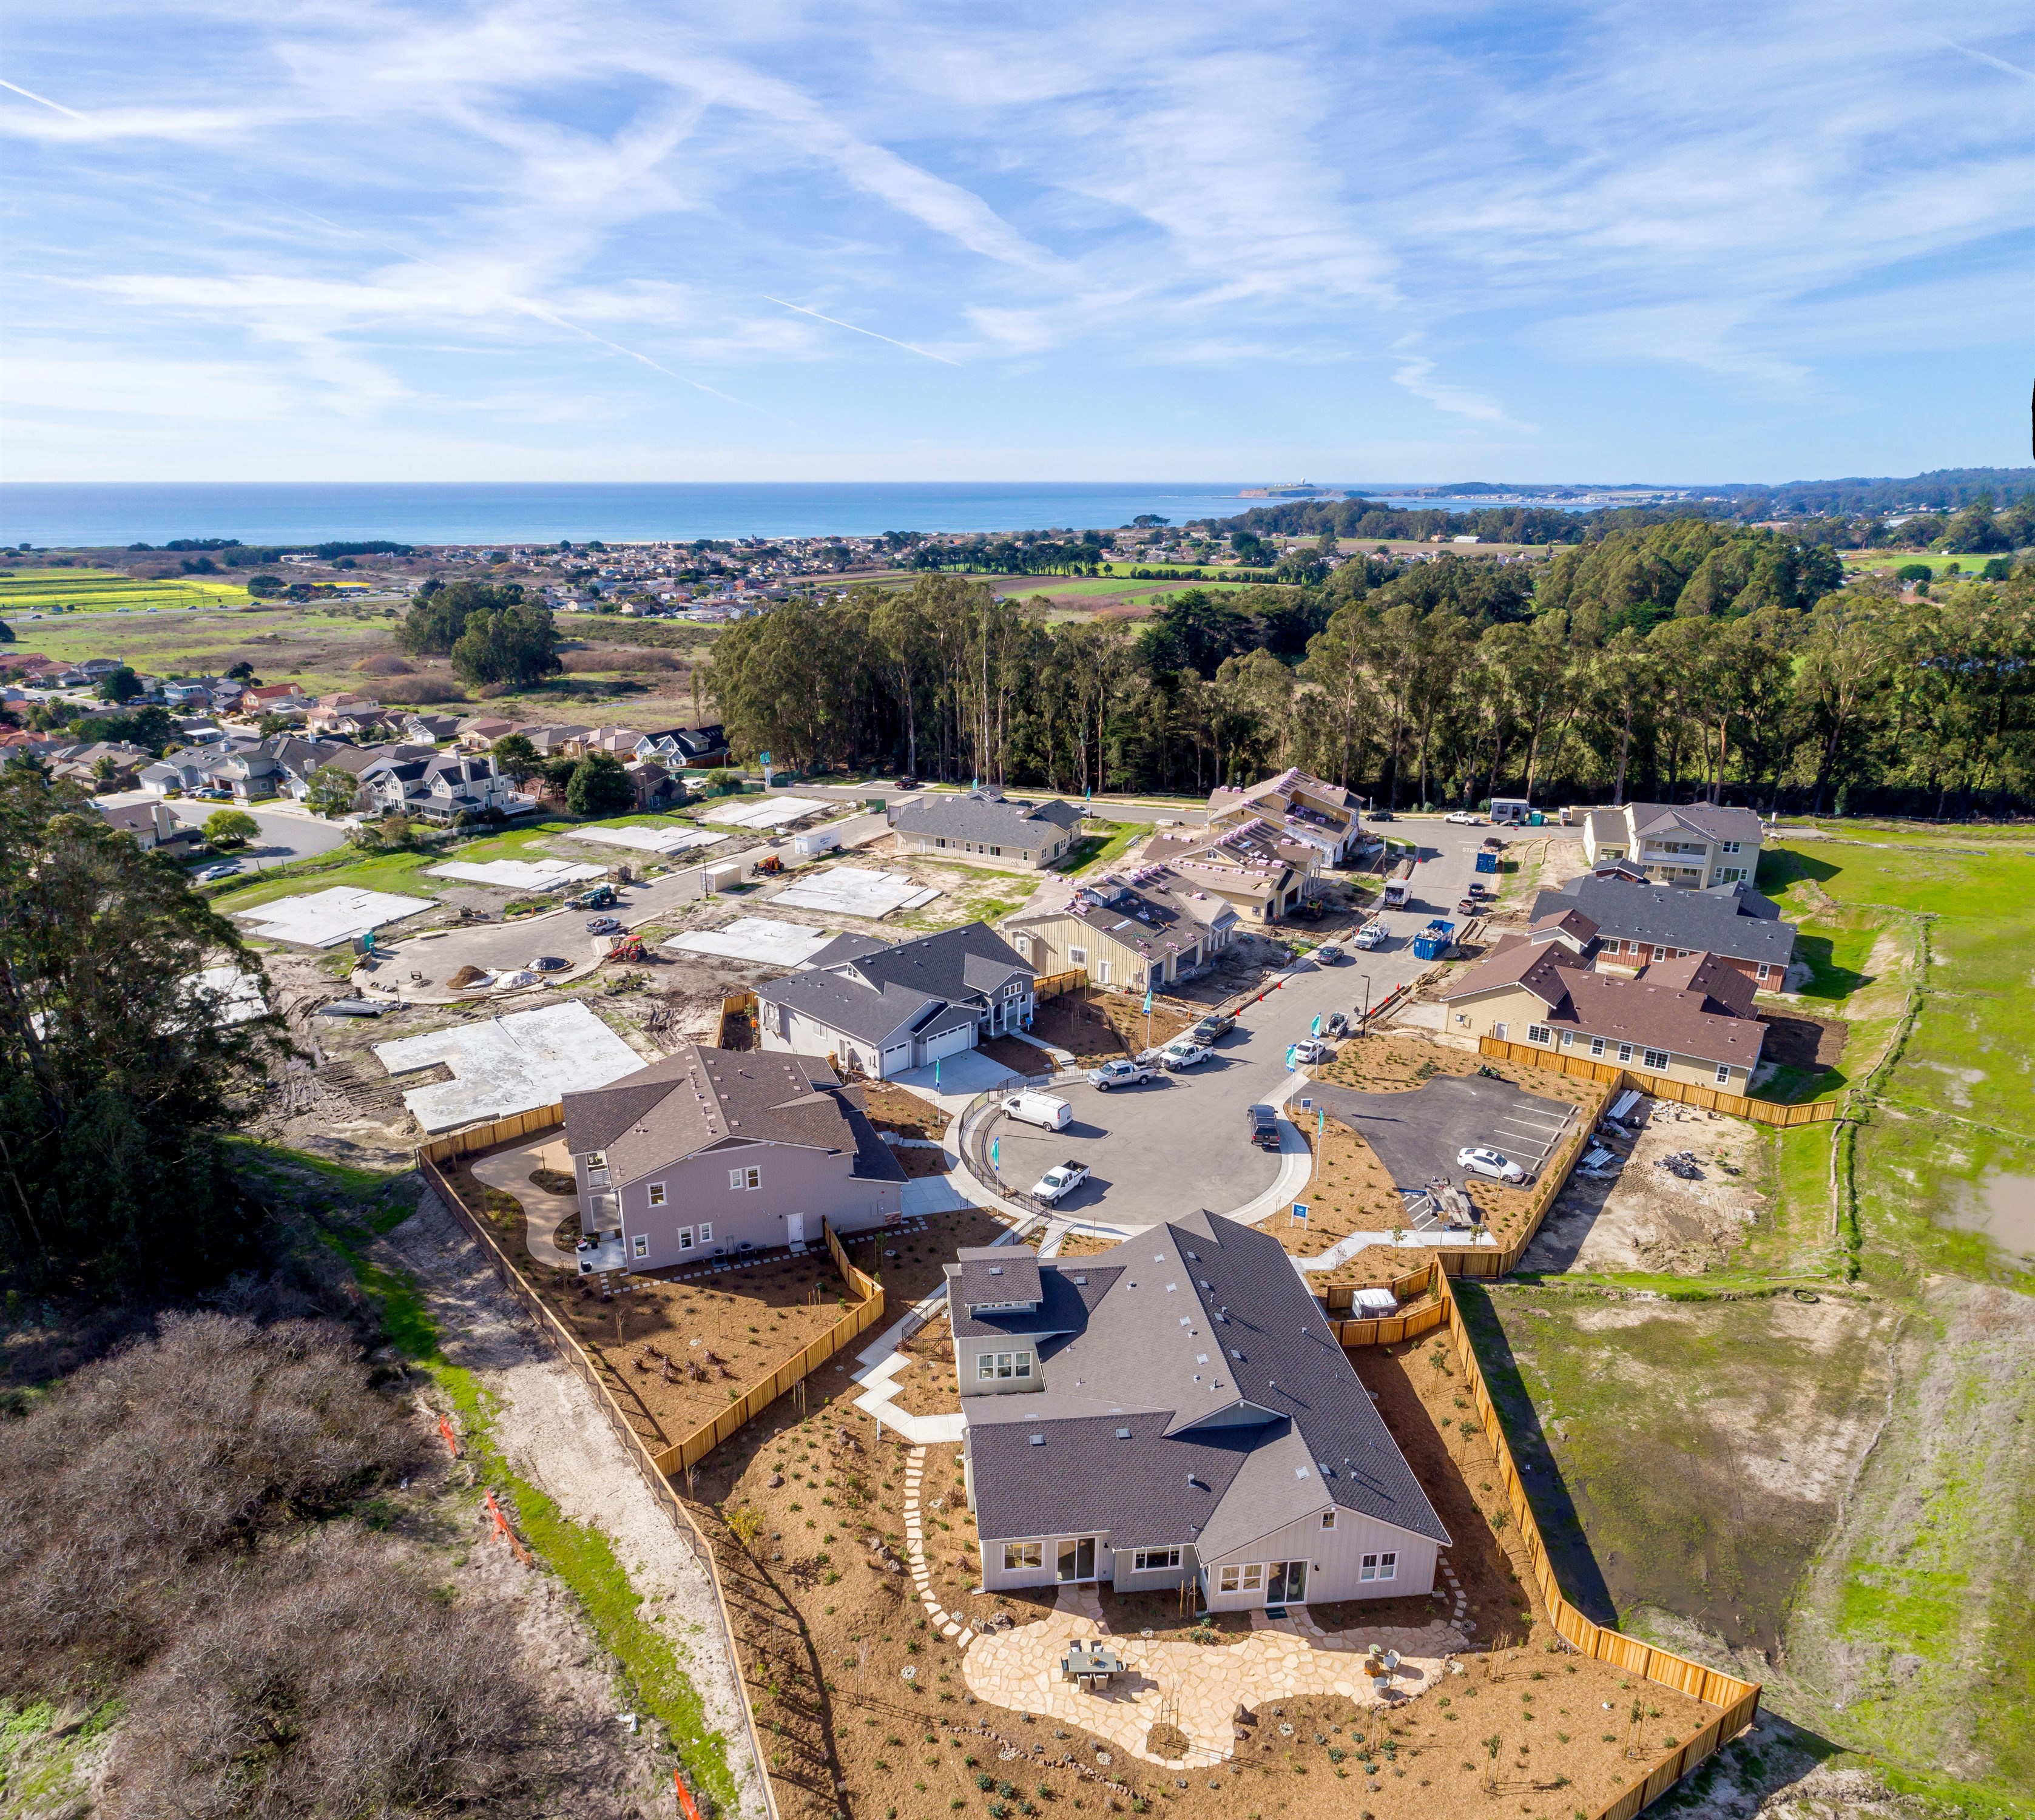 Aerial shot of a housing development with the ocean in the distance